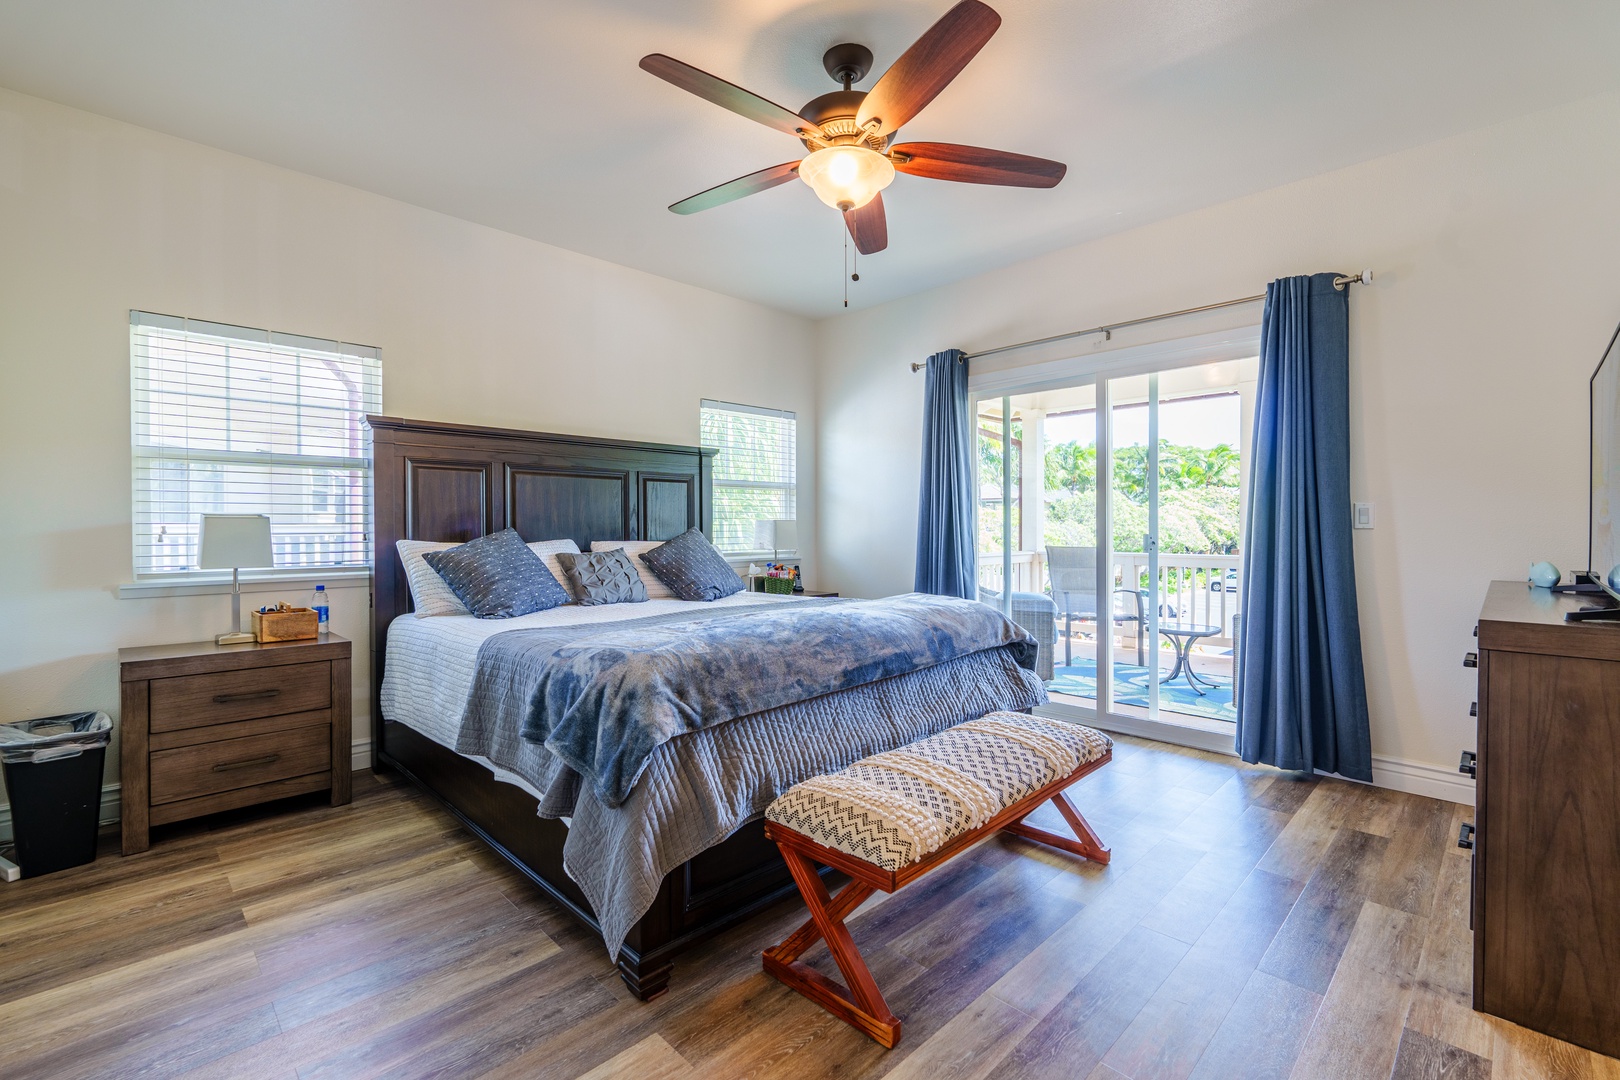 Kapolei Vacation Rentals, Coconut Plantation 1078-1 - The primary guest bedroom is located upstairs with ceiling fan and natural lighting.